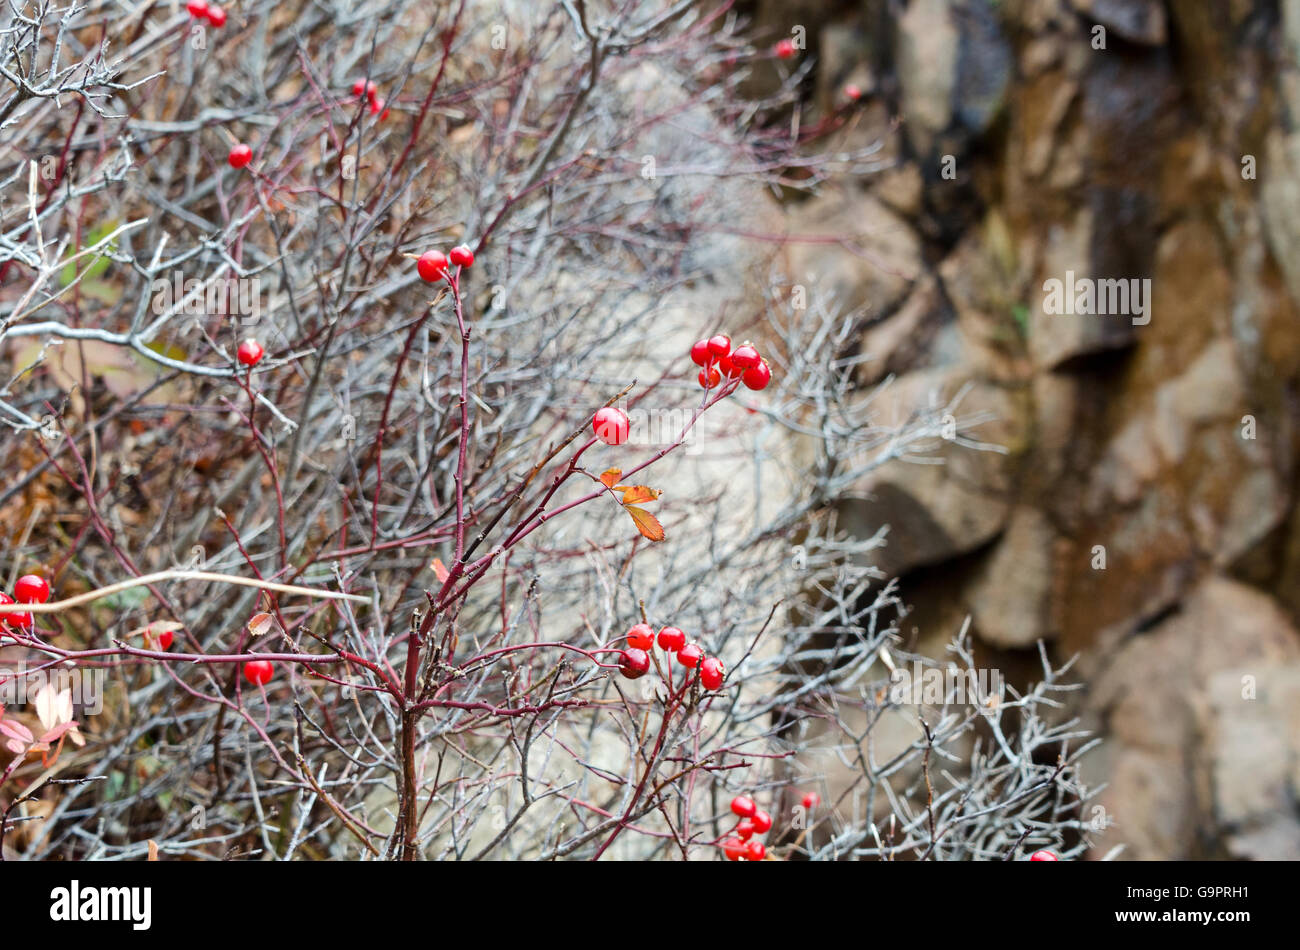 Wild rose hips growing on the seaside cliffs of Seal Harbor, Maine. Stock Photo